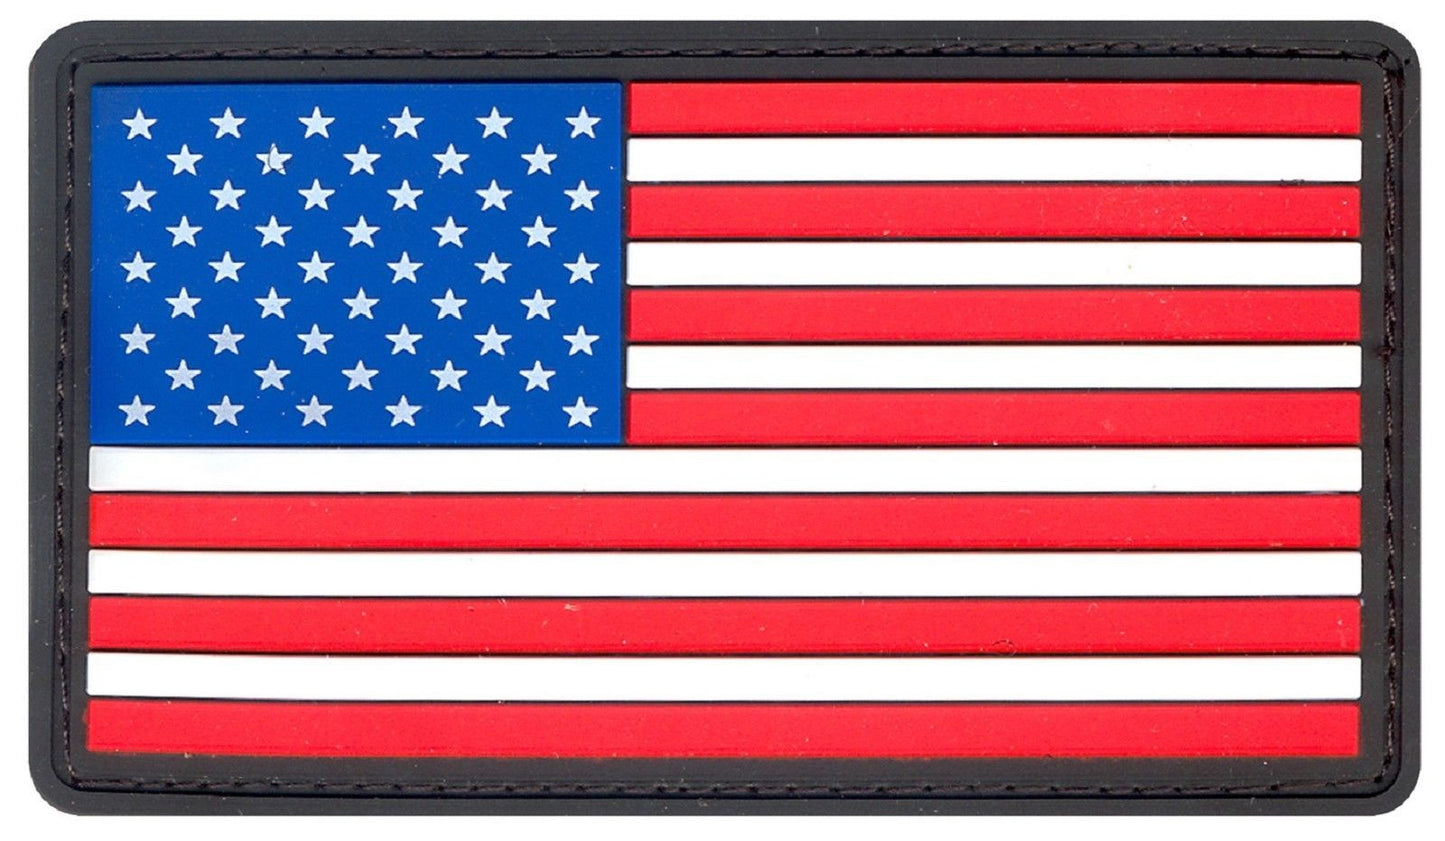 PVC USA American Flag Patch - Red, White & Blue Velcro-Type Hook Back Patches